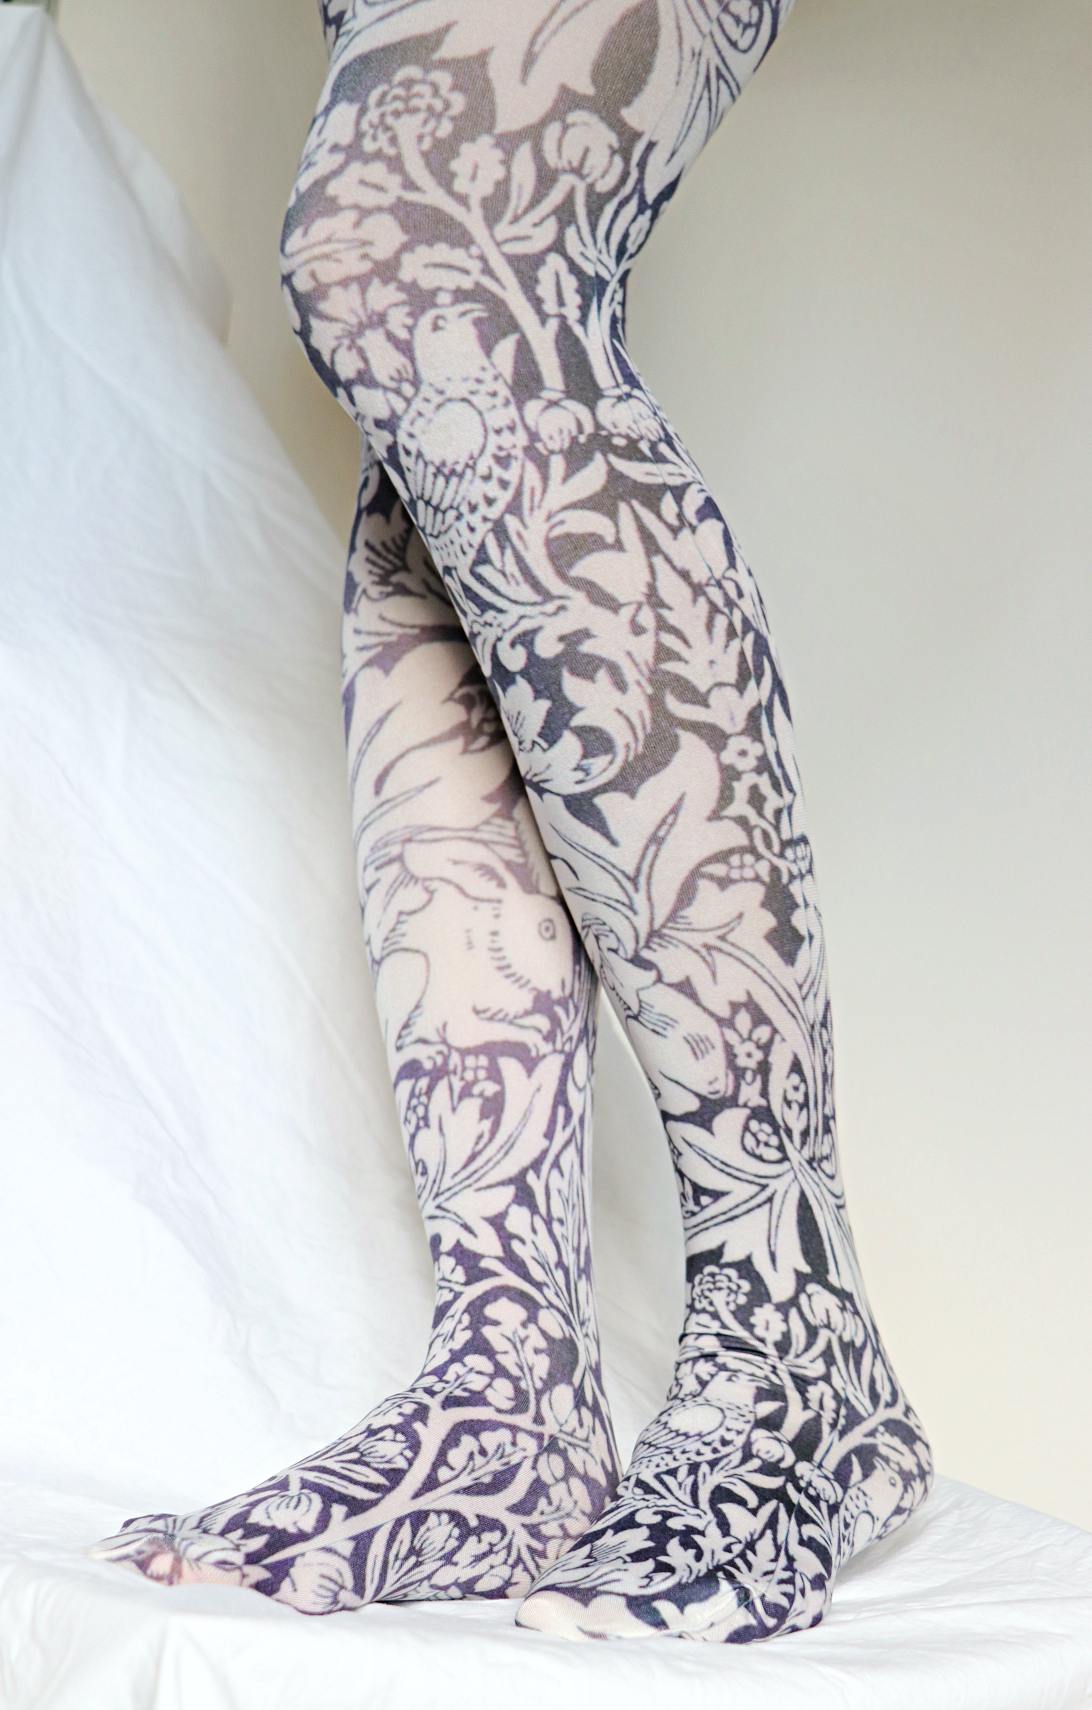 TABBISOCKS brand William Morris collection Bre'r Brother Rabbit tights with an overall rabbit and plant design in antique white and black